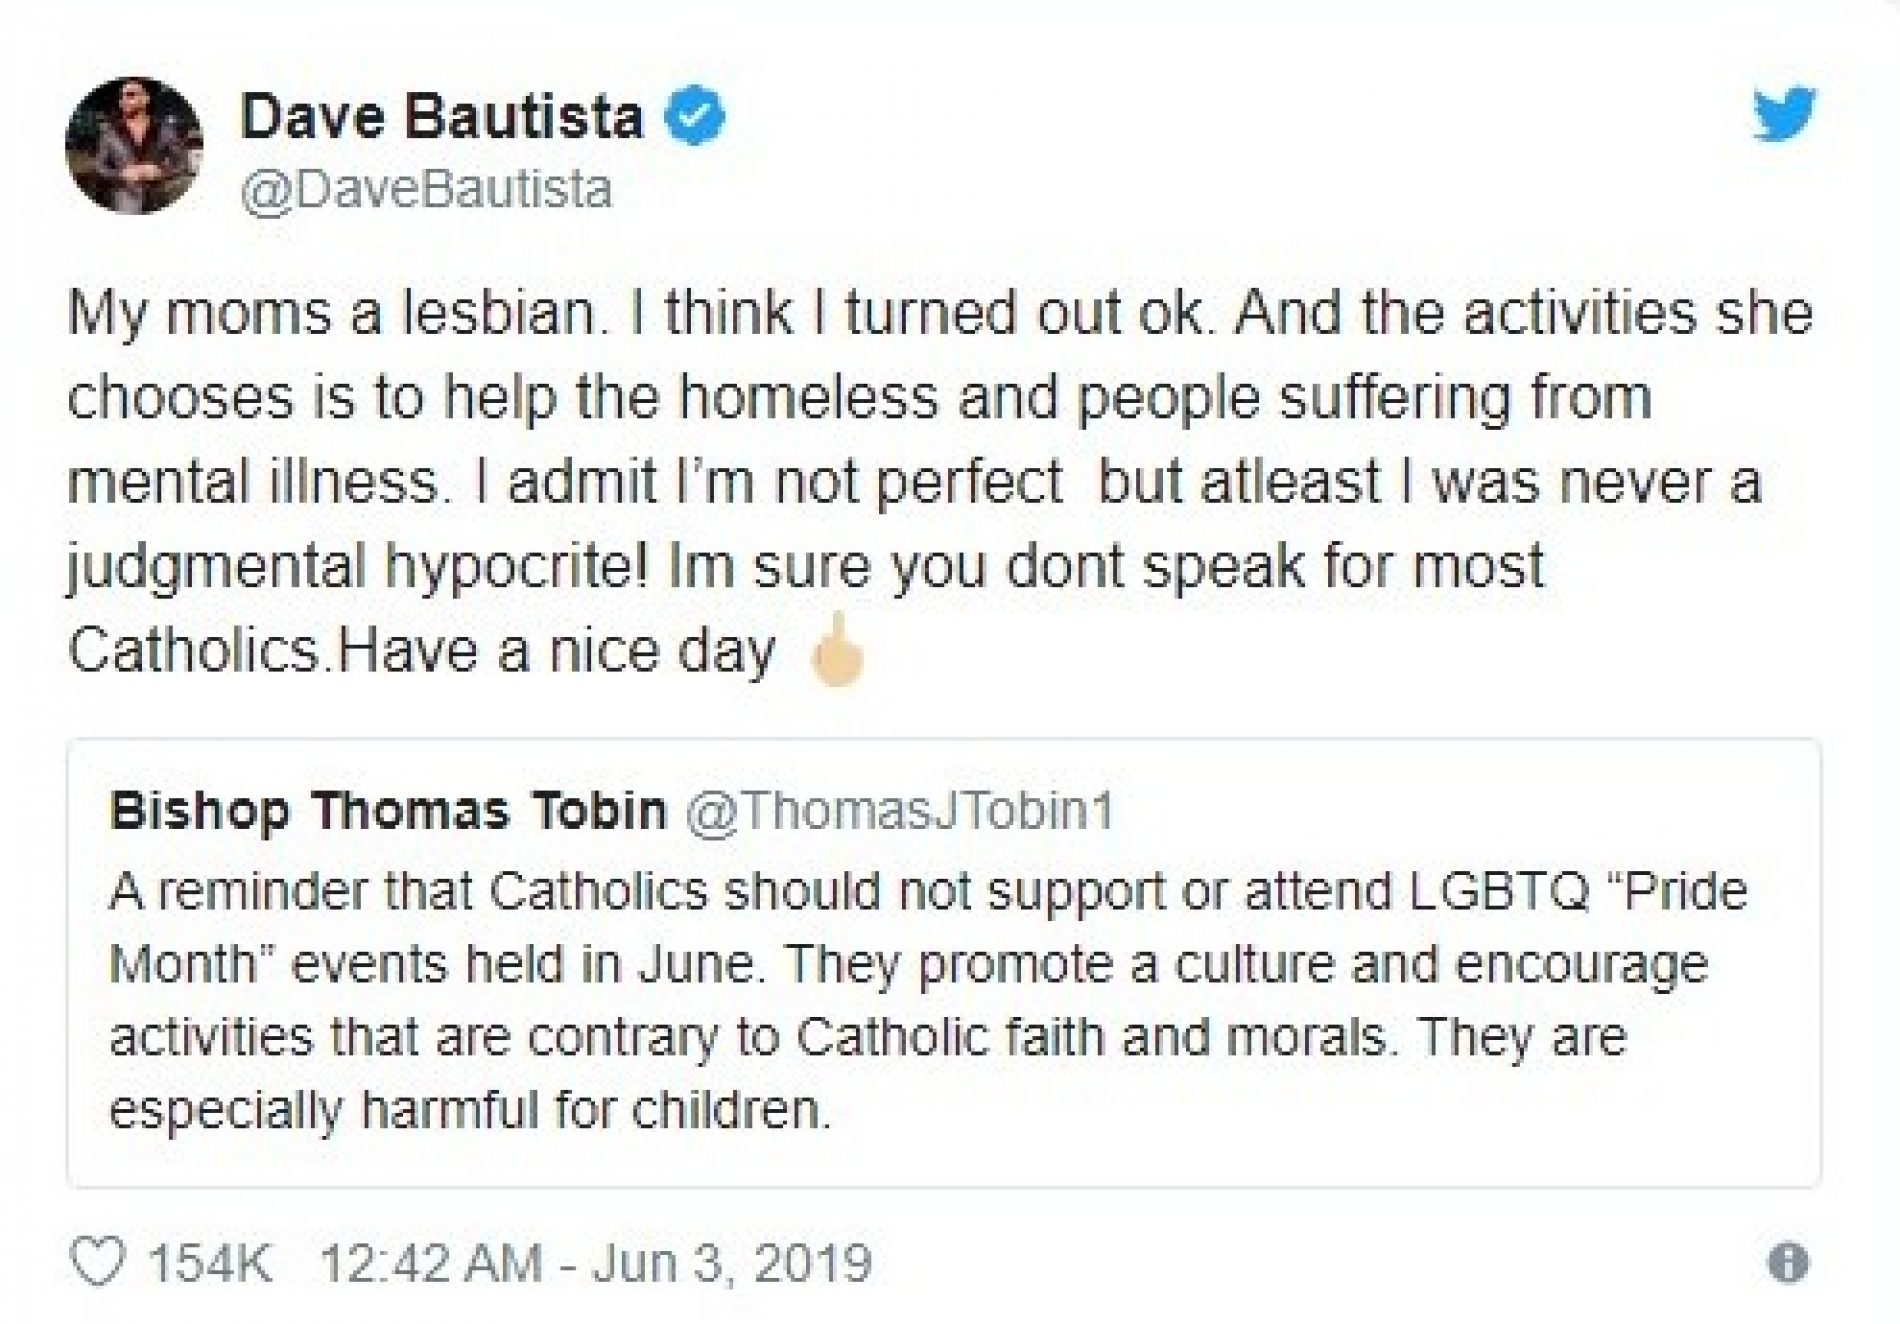 Catholic Bishop calls for Pride Month boycott and meets with furious backlash